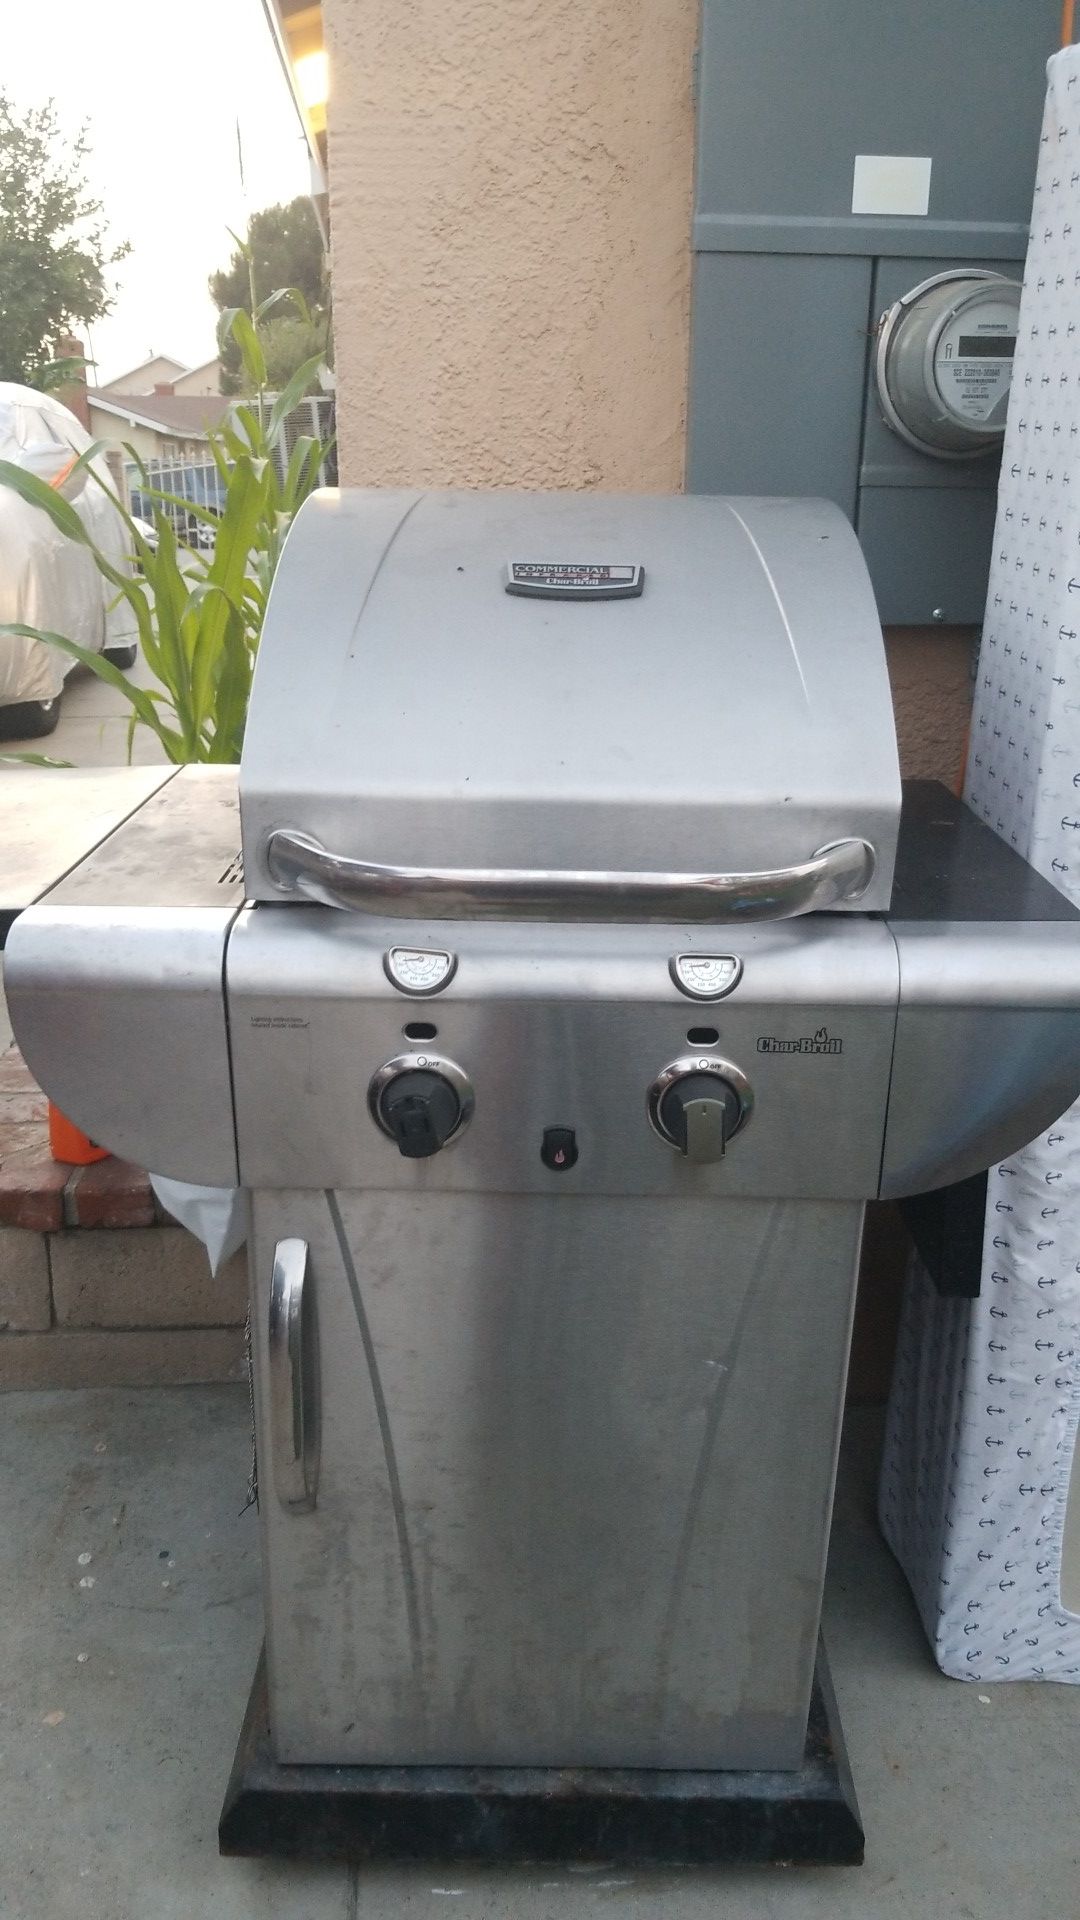 Commercial infrared char broil grill